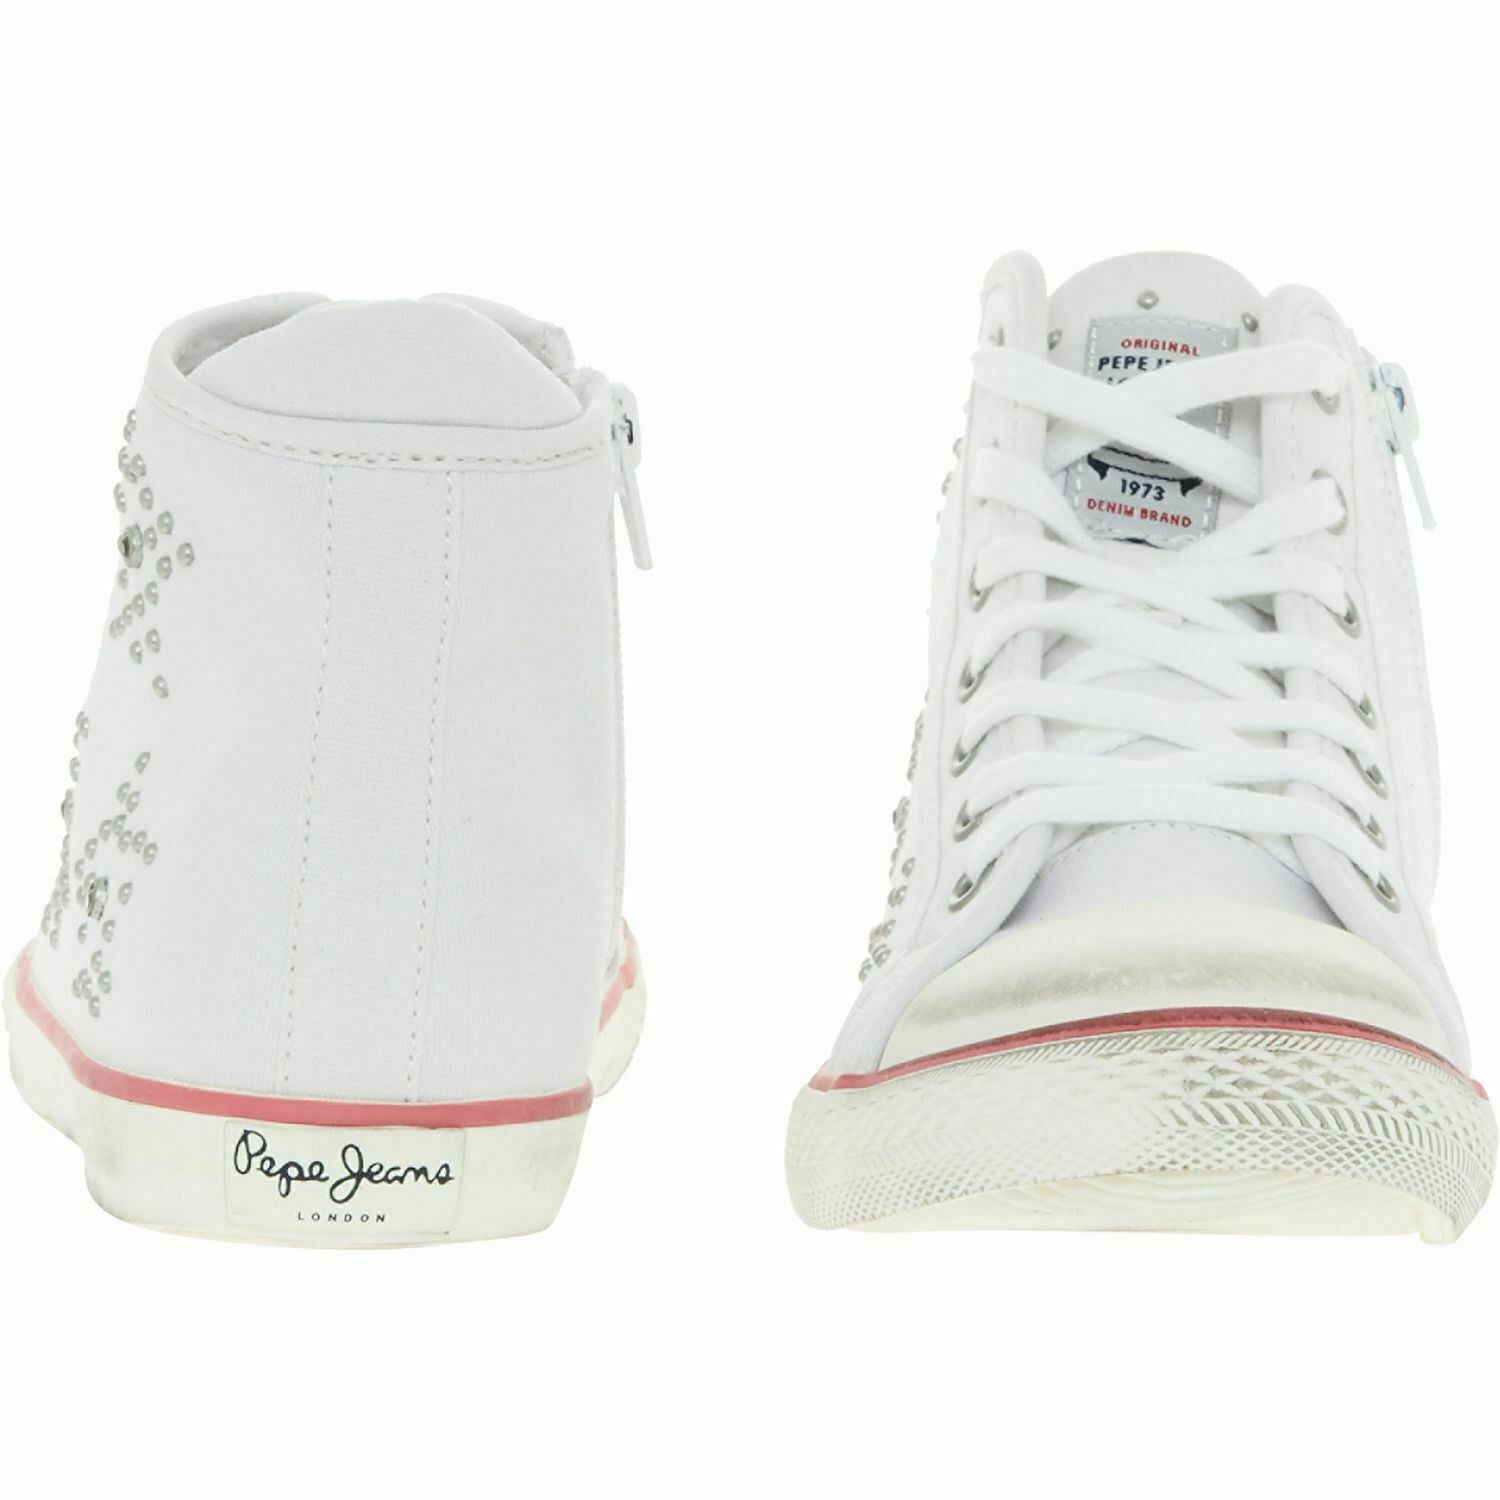 PEPE JEANS Girls' White Distressed Canvas Hi Top Trainers, size UK junior 4